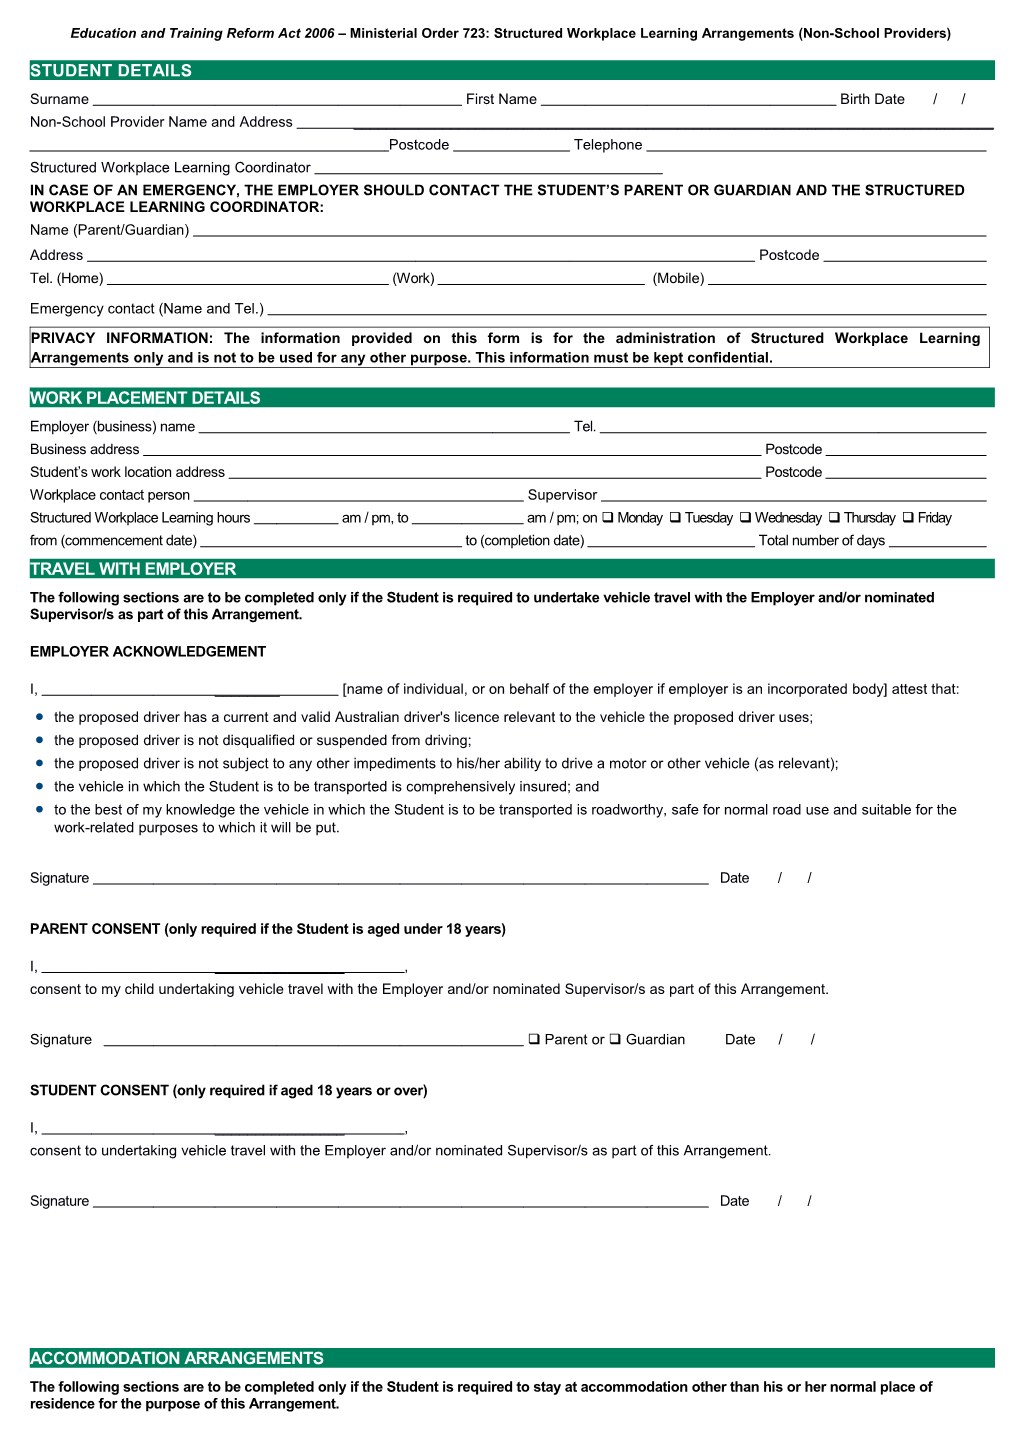 SWL Travel and Accommodation Form